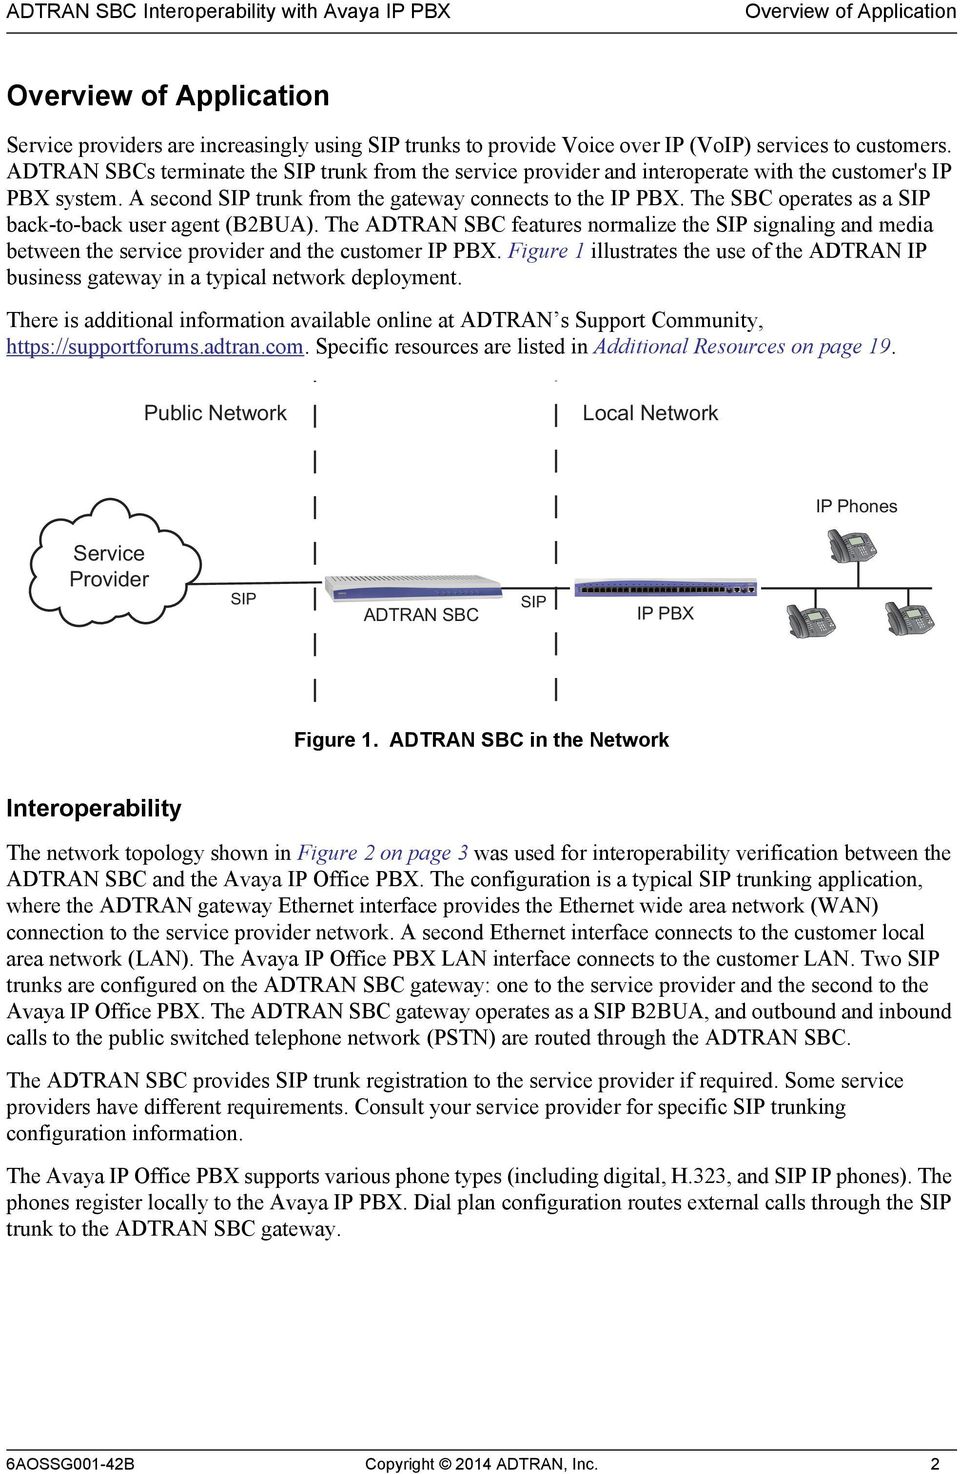 The SBC operates as a SIP back-to-back user agent (B2BUA). The ADTRAN SBC features normalize the SIP signaling and media between the service provider and the customer IP PBX.